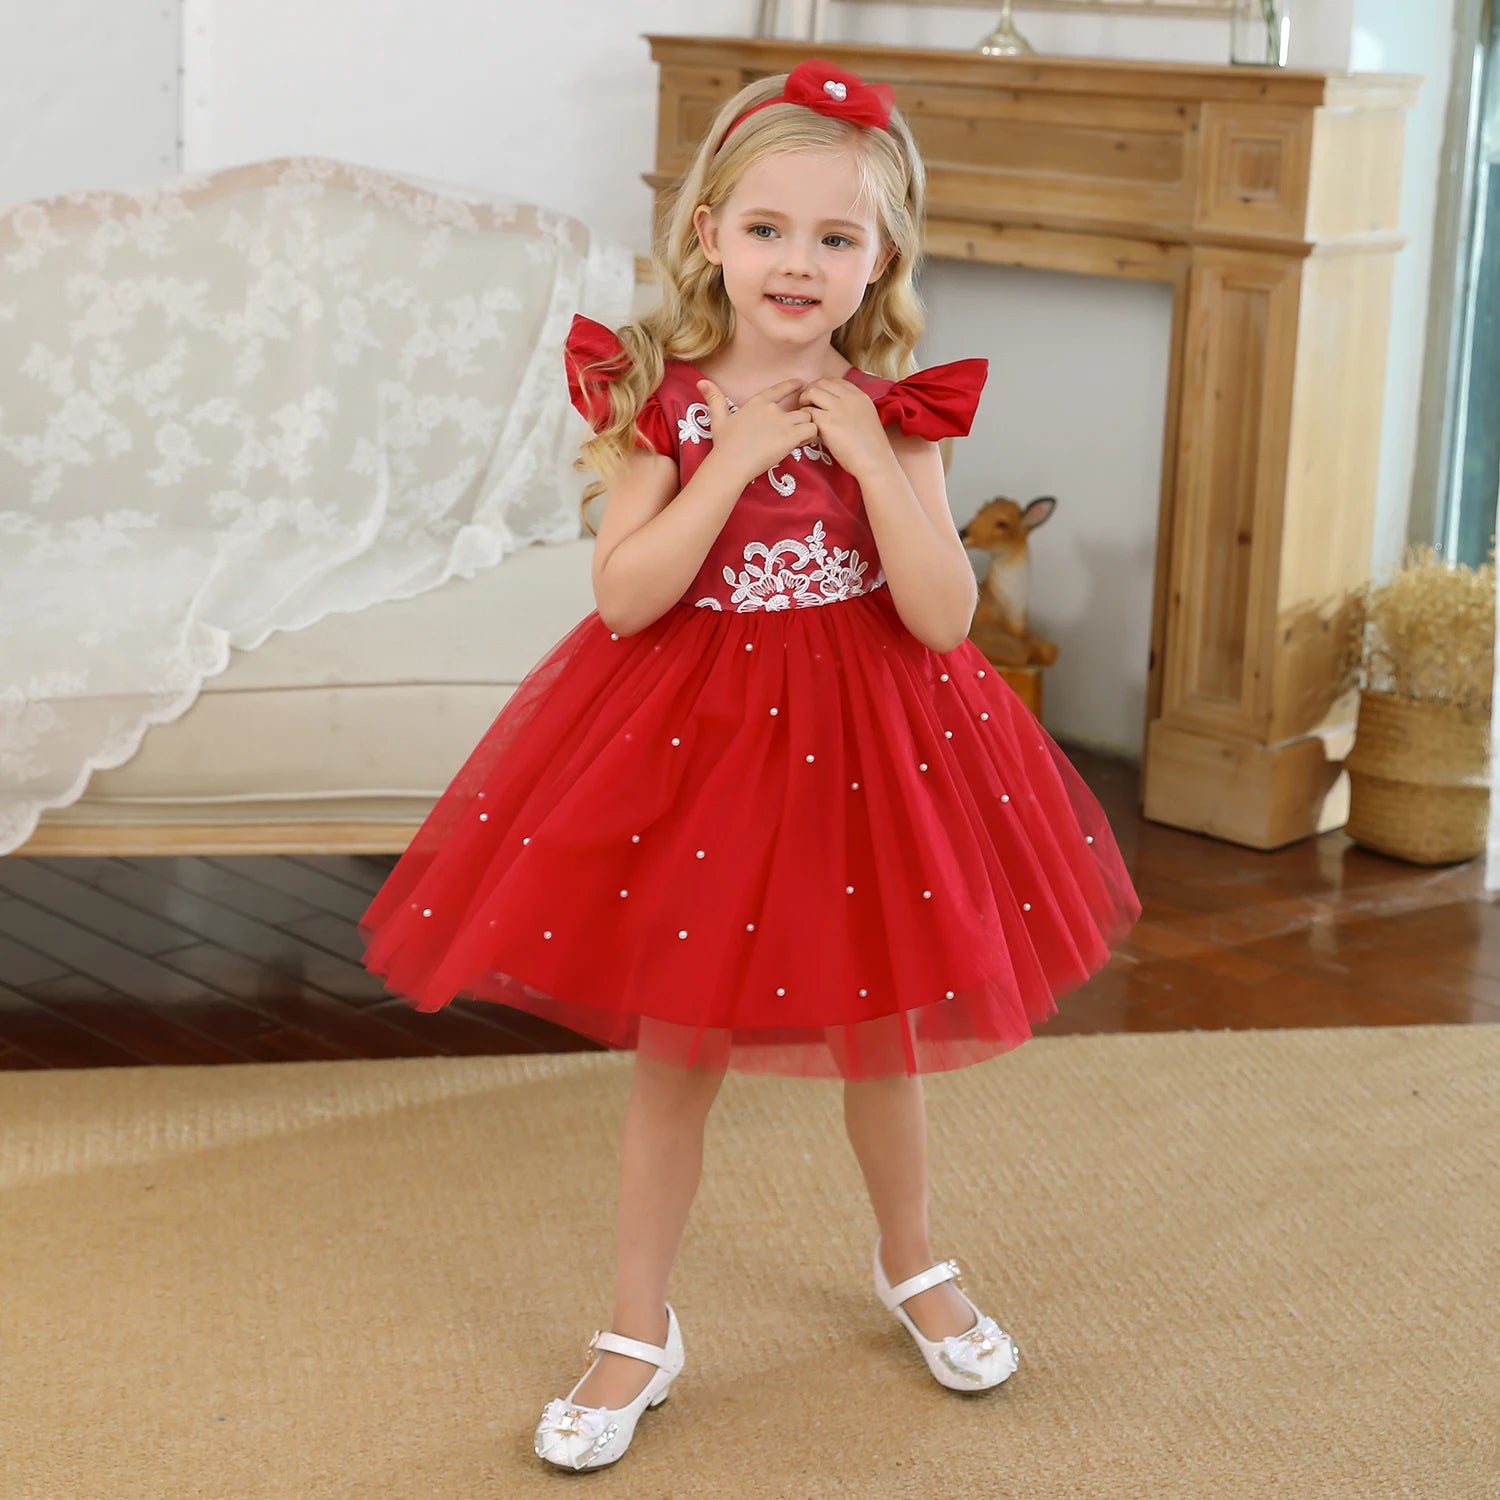 Infant Lace Backless Pink Flower Girl Dresses Red by Baby Minaj Cruz